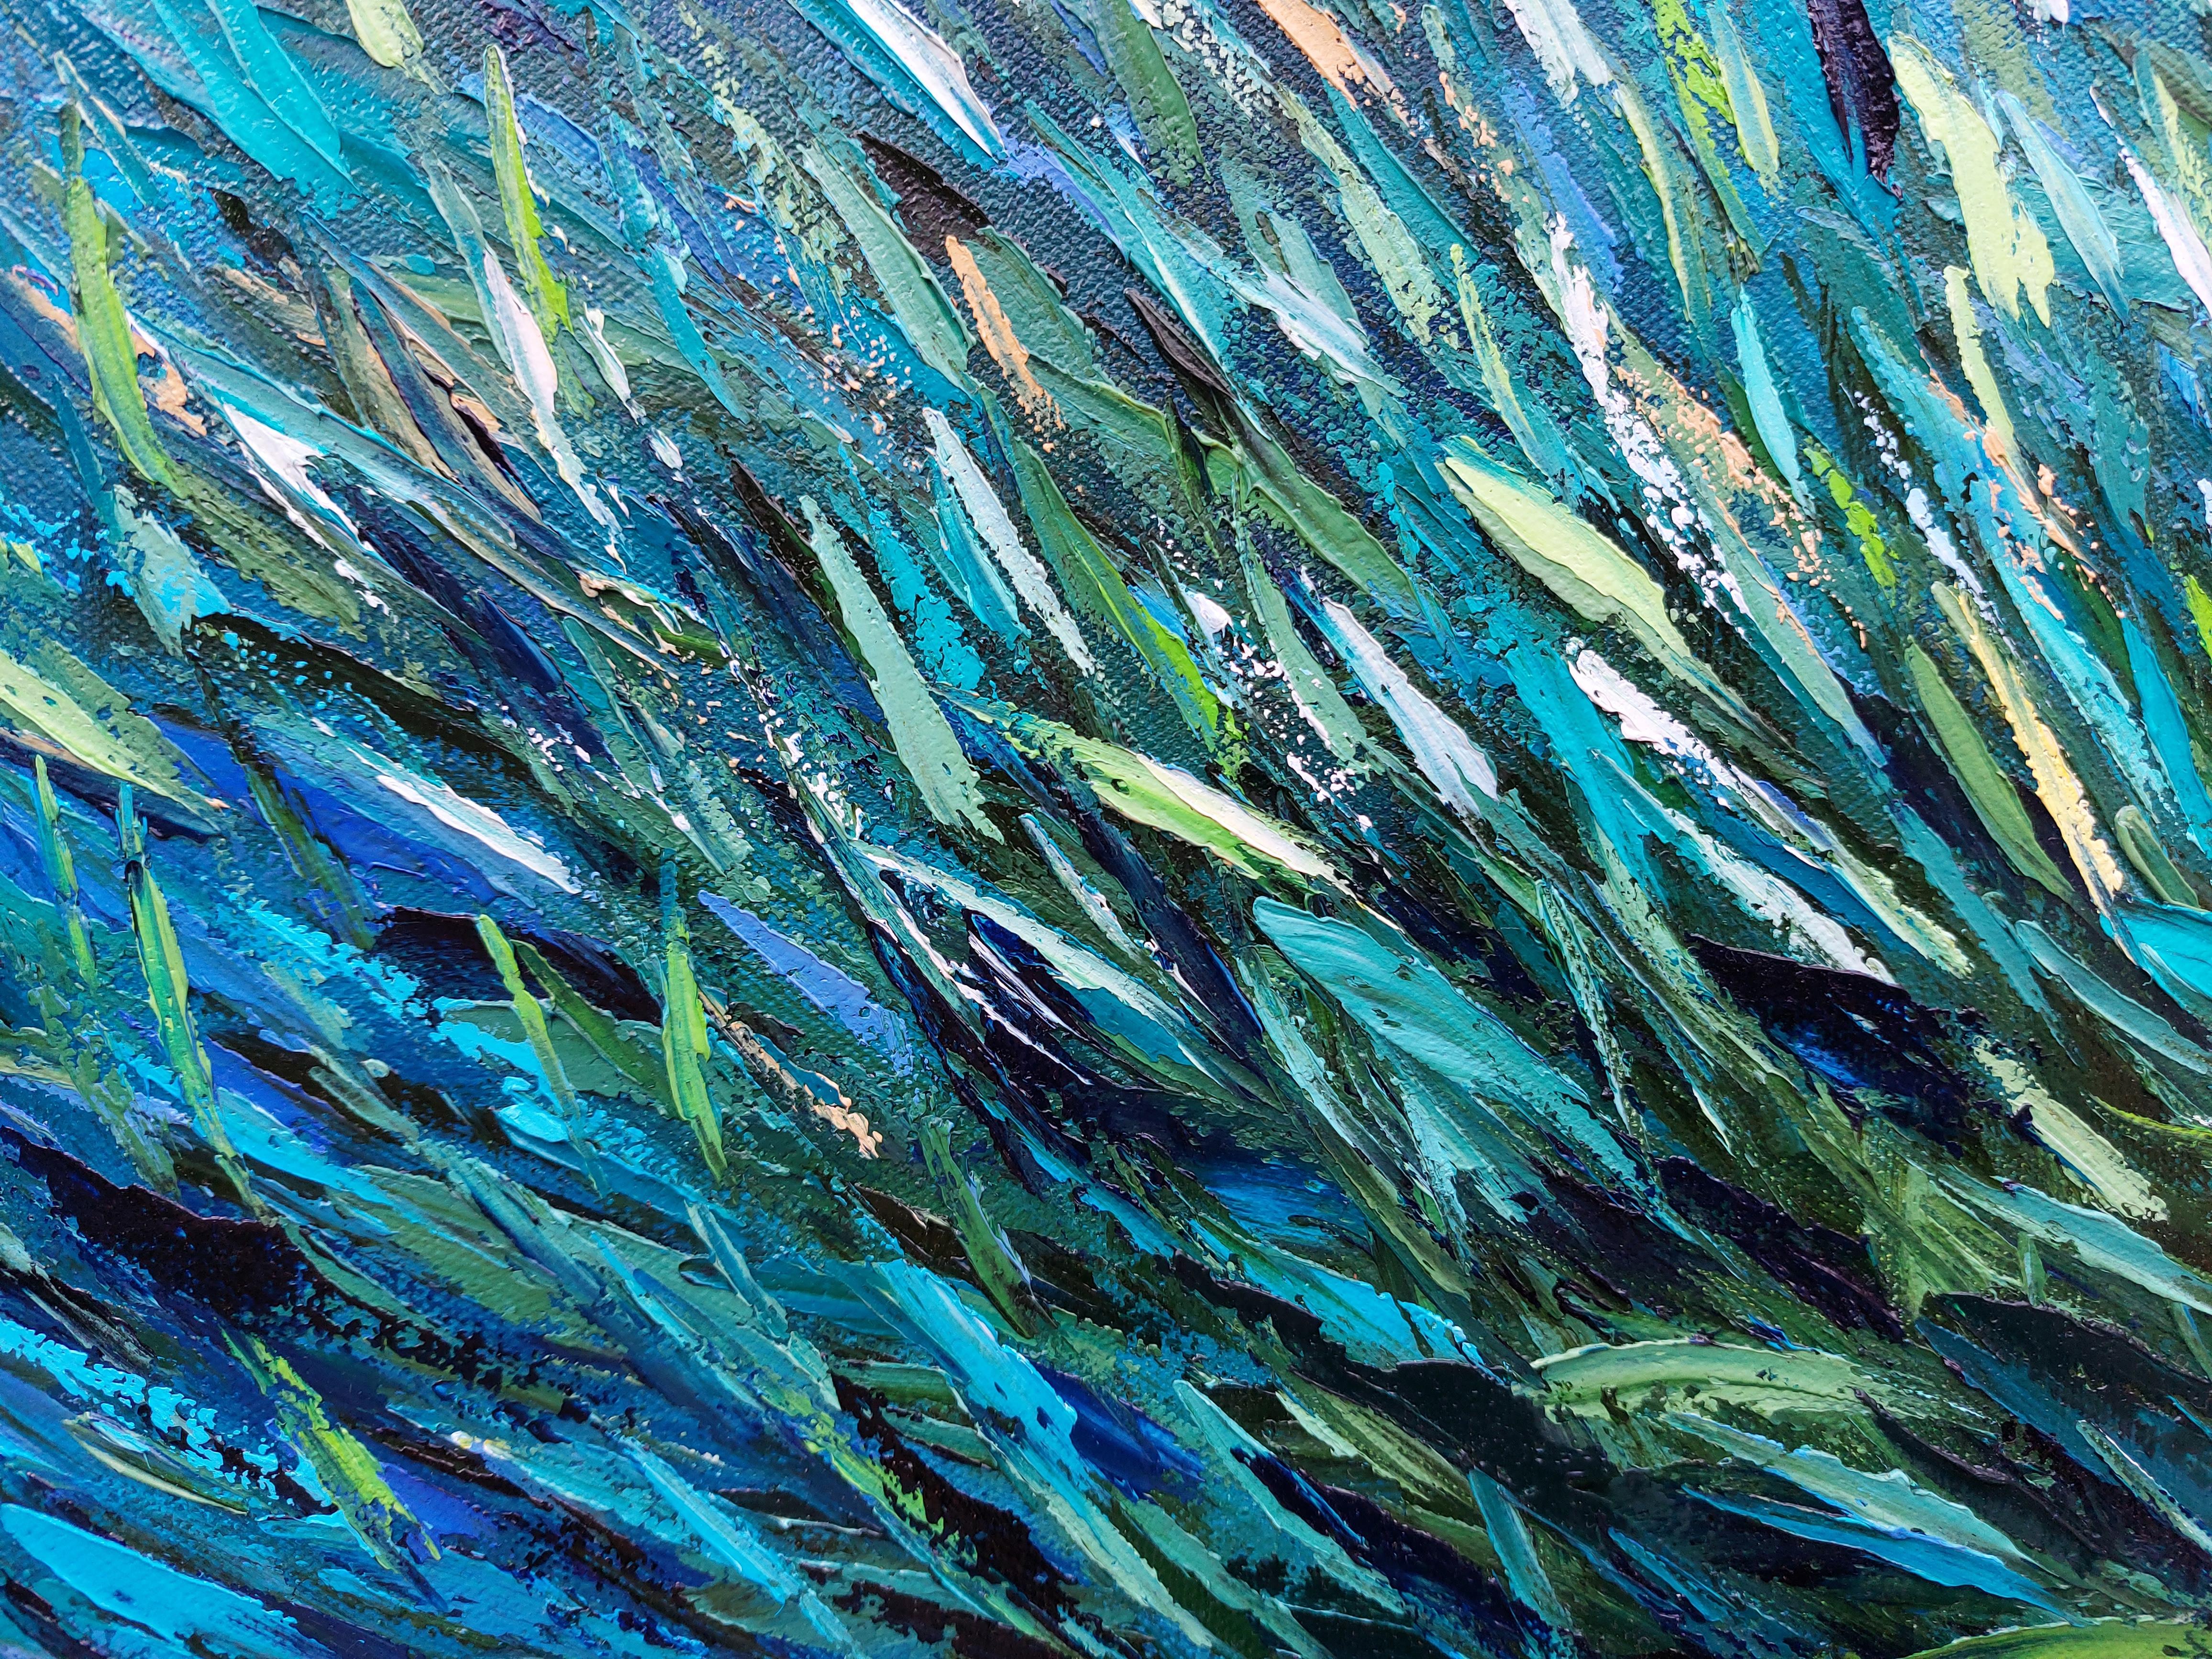 School of Fish Sardines Stream - Abstract Expressionist Painting by Olga Nikitina